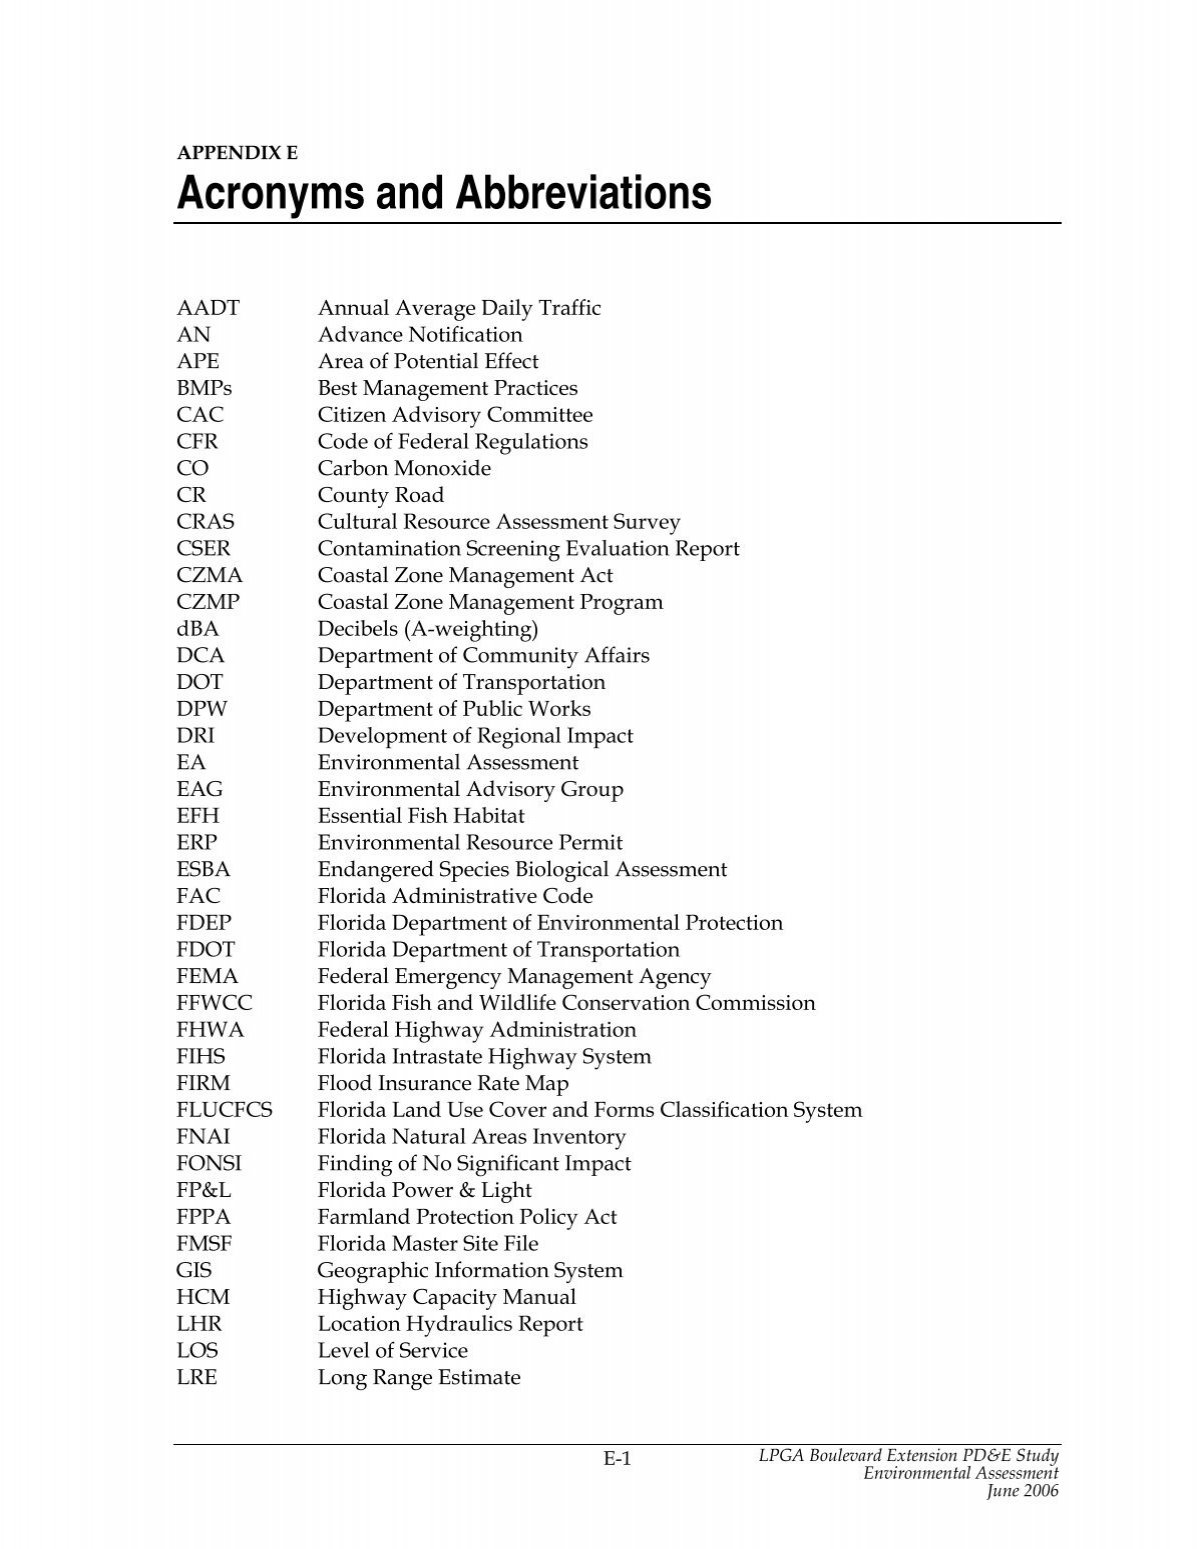 Acronyms and Abbreviation